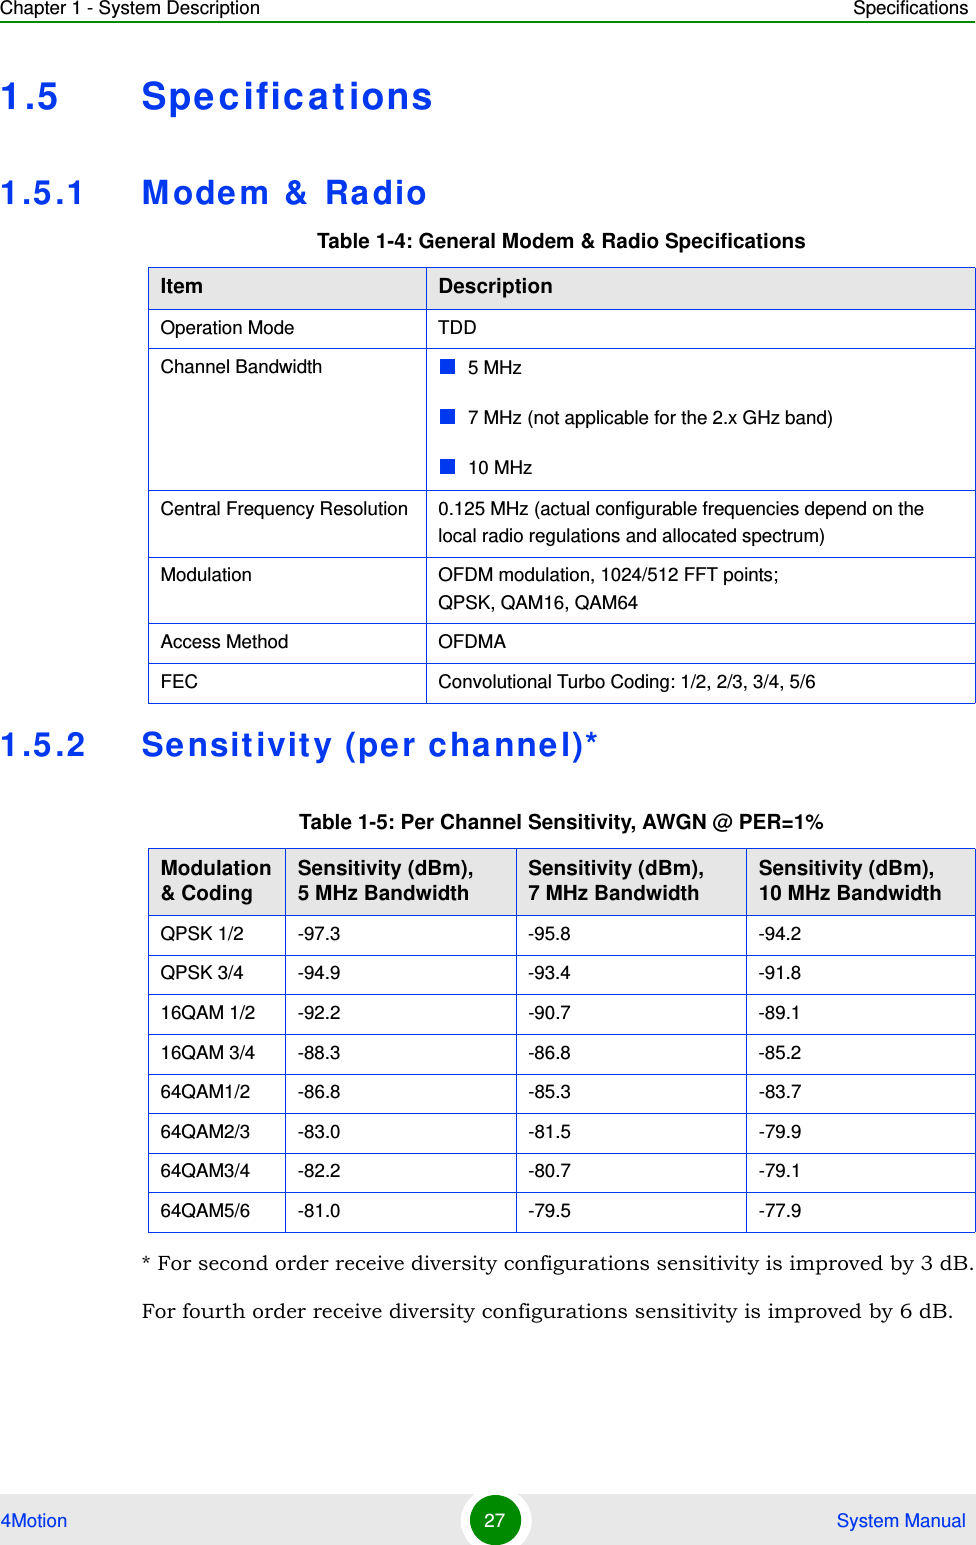 Chapter 1 - System Description Specifications4Motion 27  System Manual1.5 Spe cifications1.5.1 Modem  &amp;  Ra dio1.5.2 Sensit ivity (per channel)** For second order receive diversity configurations sensitivity is improved by 3 dB.For fourth order receive diversity configurations sensitivity is improved by 6 dB.Table 1-4: General Modem &amp; Radio SpecificationsItem DescriptionOperation Mode TDDChannel Bandwidth 5 MHz7 MHz (not applicable for the 2.x GHz band)10 MHzCentral Frequency Resolution 0.125 MHz (actual configurable frequencies depend on the local radio regulations and allocated spectrum)Modulation OFDM modulation, 1024/512 FFT points;  QPSK, QAM16, QAM64Access Method OFDMAFEC Convolutional Turbo Coding: 1/2, 2/3, 3/4, 5/6Table 1-5: Per Channel Sensitivity, AWGN @ PER=1%Modulation &amp; CodingSensitivity (dBm),  5 MHz BandwidthSensitivity (dBm), 7 MHz BandwidthSensitivity (dBm),  10 MHz BandwidthQPSK 1/2 -97.3 -95.8 -94.2QPSK 3/4 -94.9 -93.4 -91.816QAM 1/2 -92.2 -90.7 -89.116QAM 3/4 -88.3 -86.8 -85.264QAM1/2 -86.8 -85.3 -83.764QAM2/3 -83.0 -81.5 -79.964QAM3/4 -82.2 -80.7 -79.164QAM5/6 -81.0 -79.5 -77.9